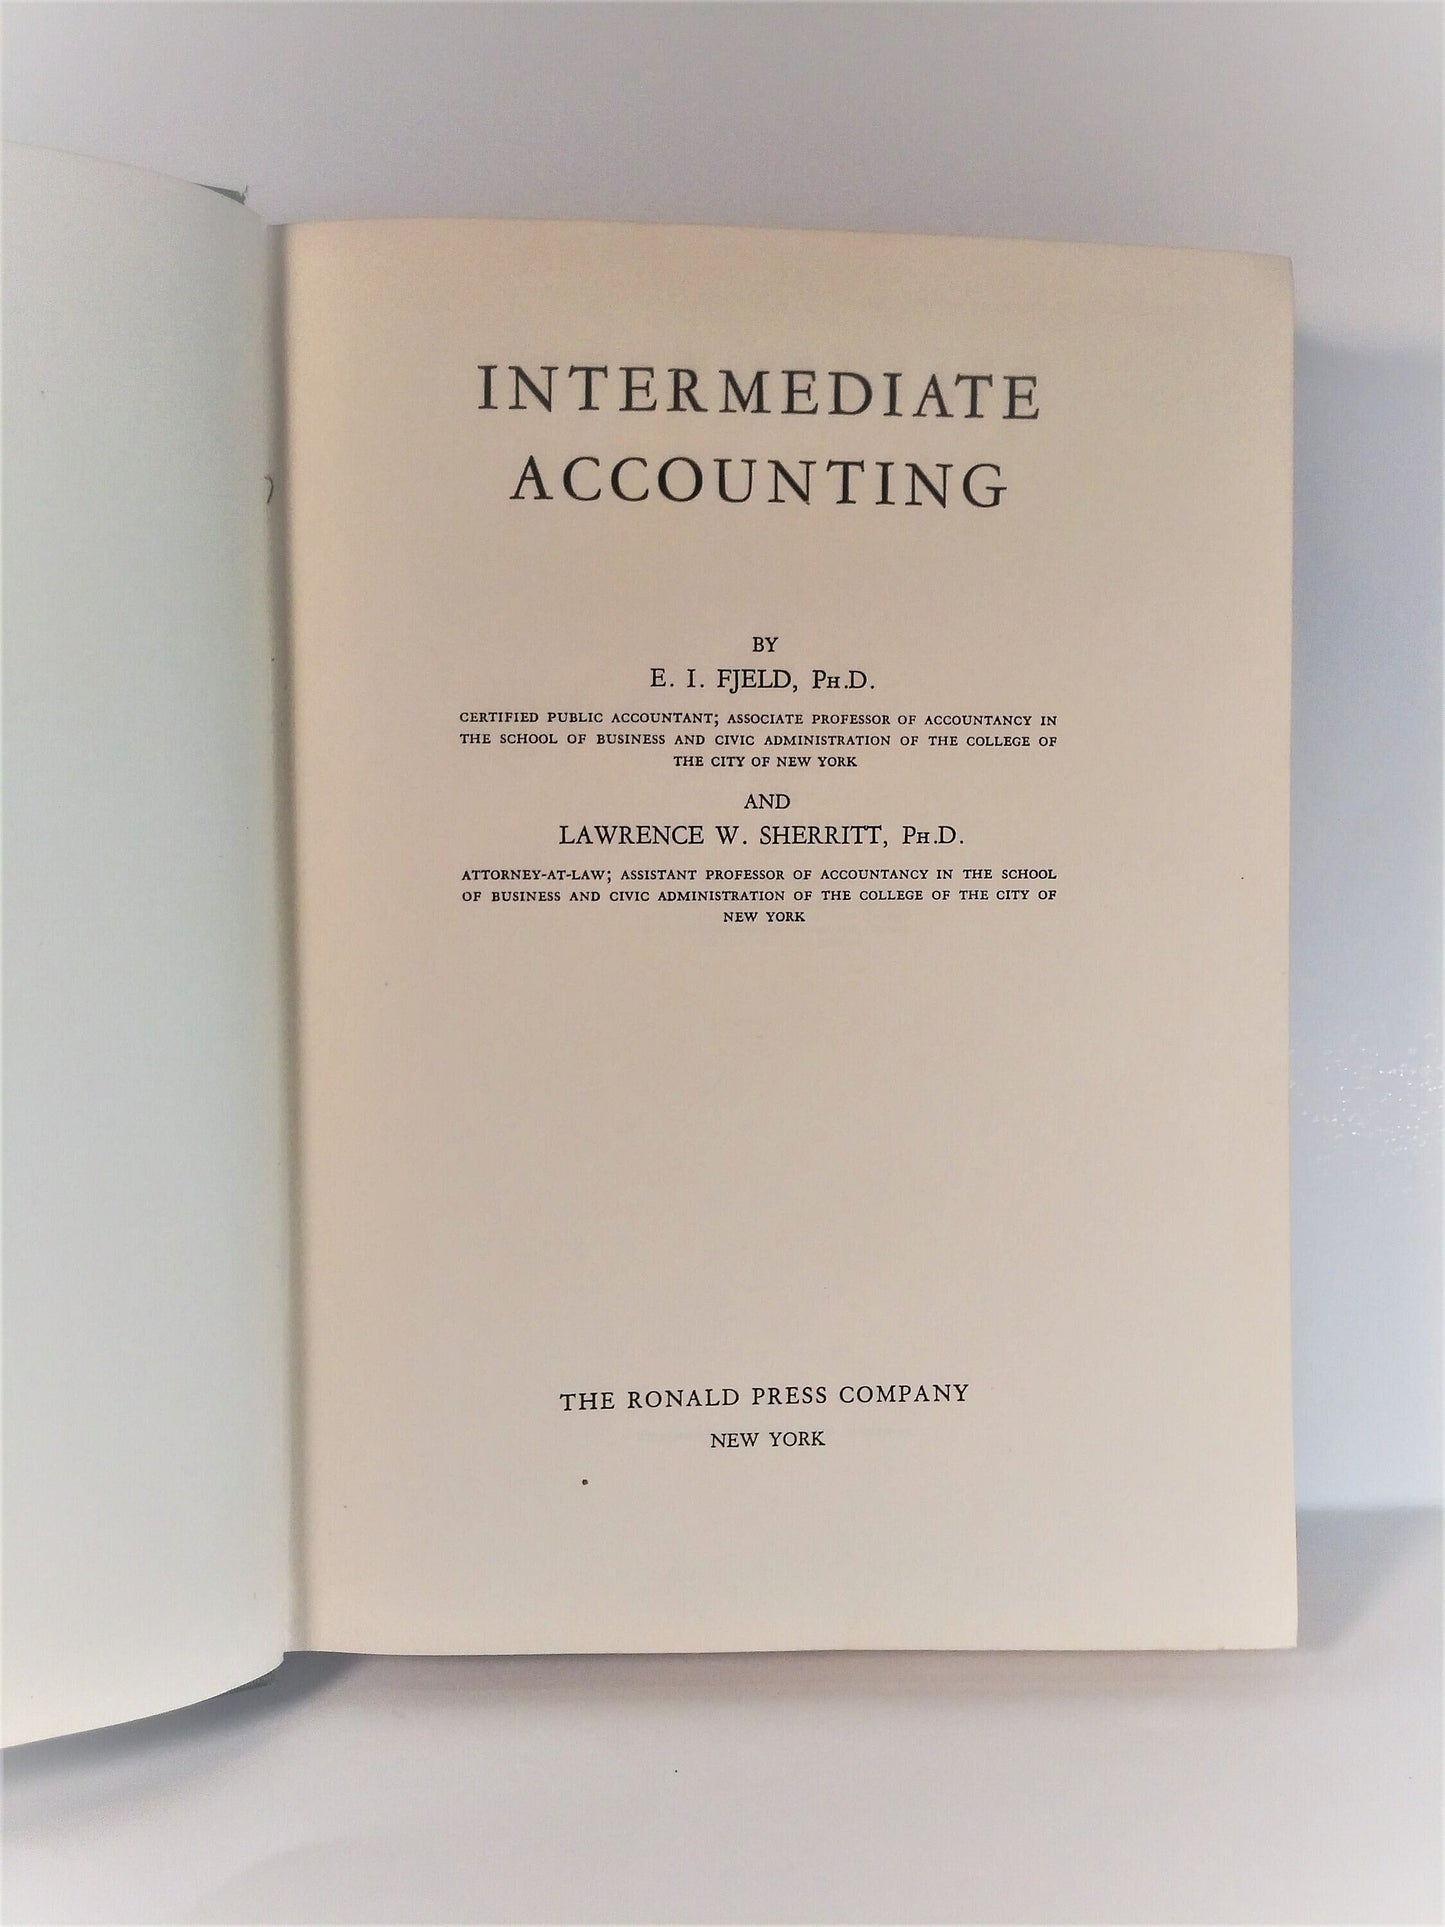 Intermediate Accounting by The Ronald Press Company 1942